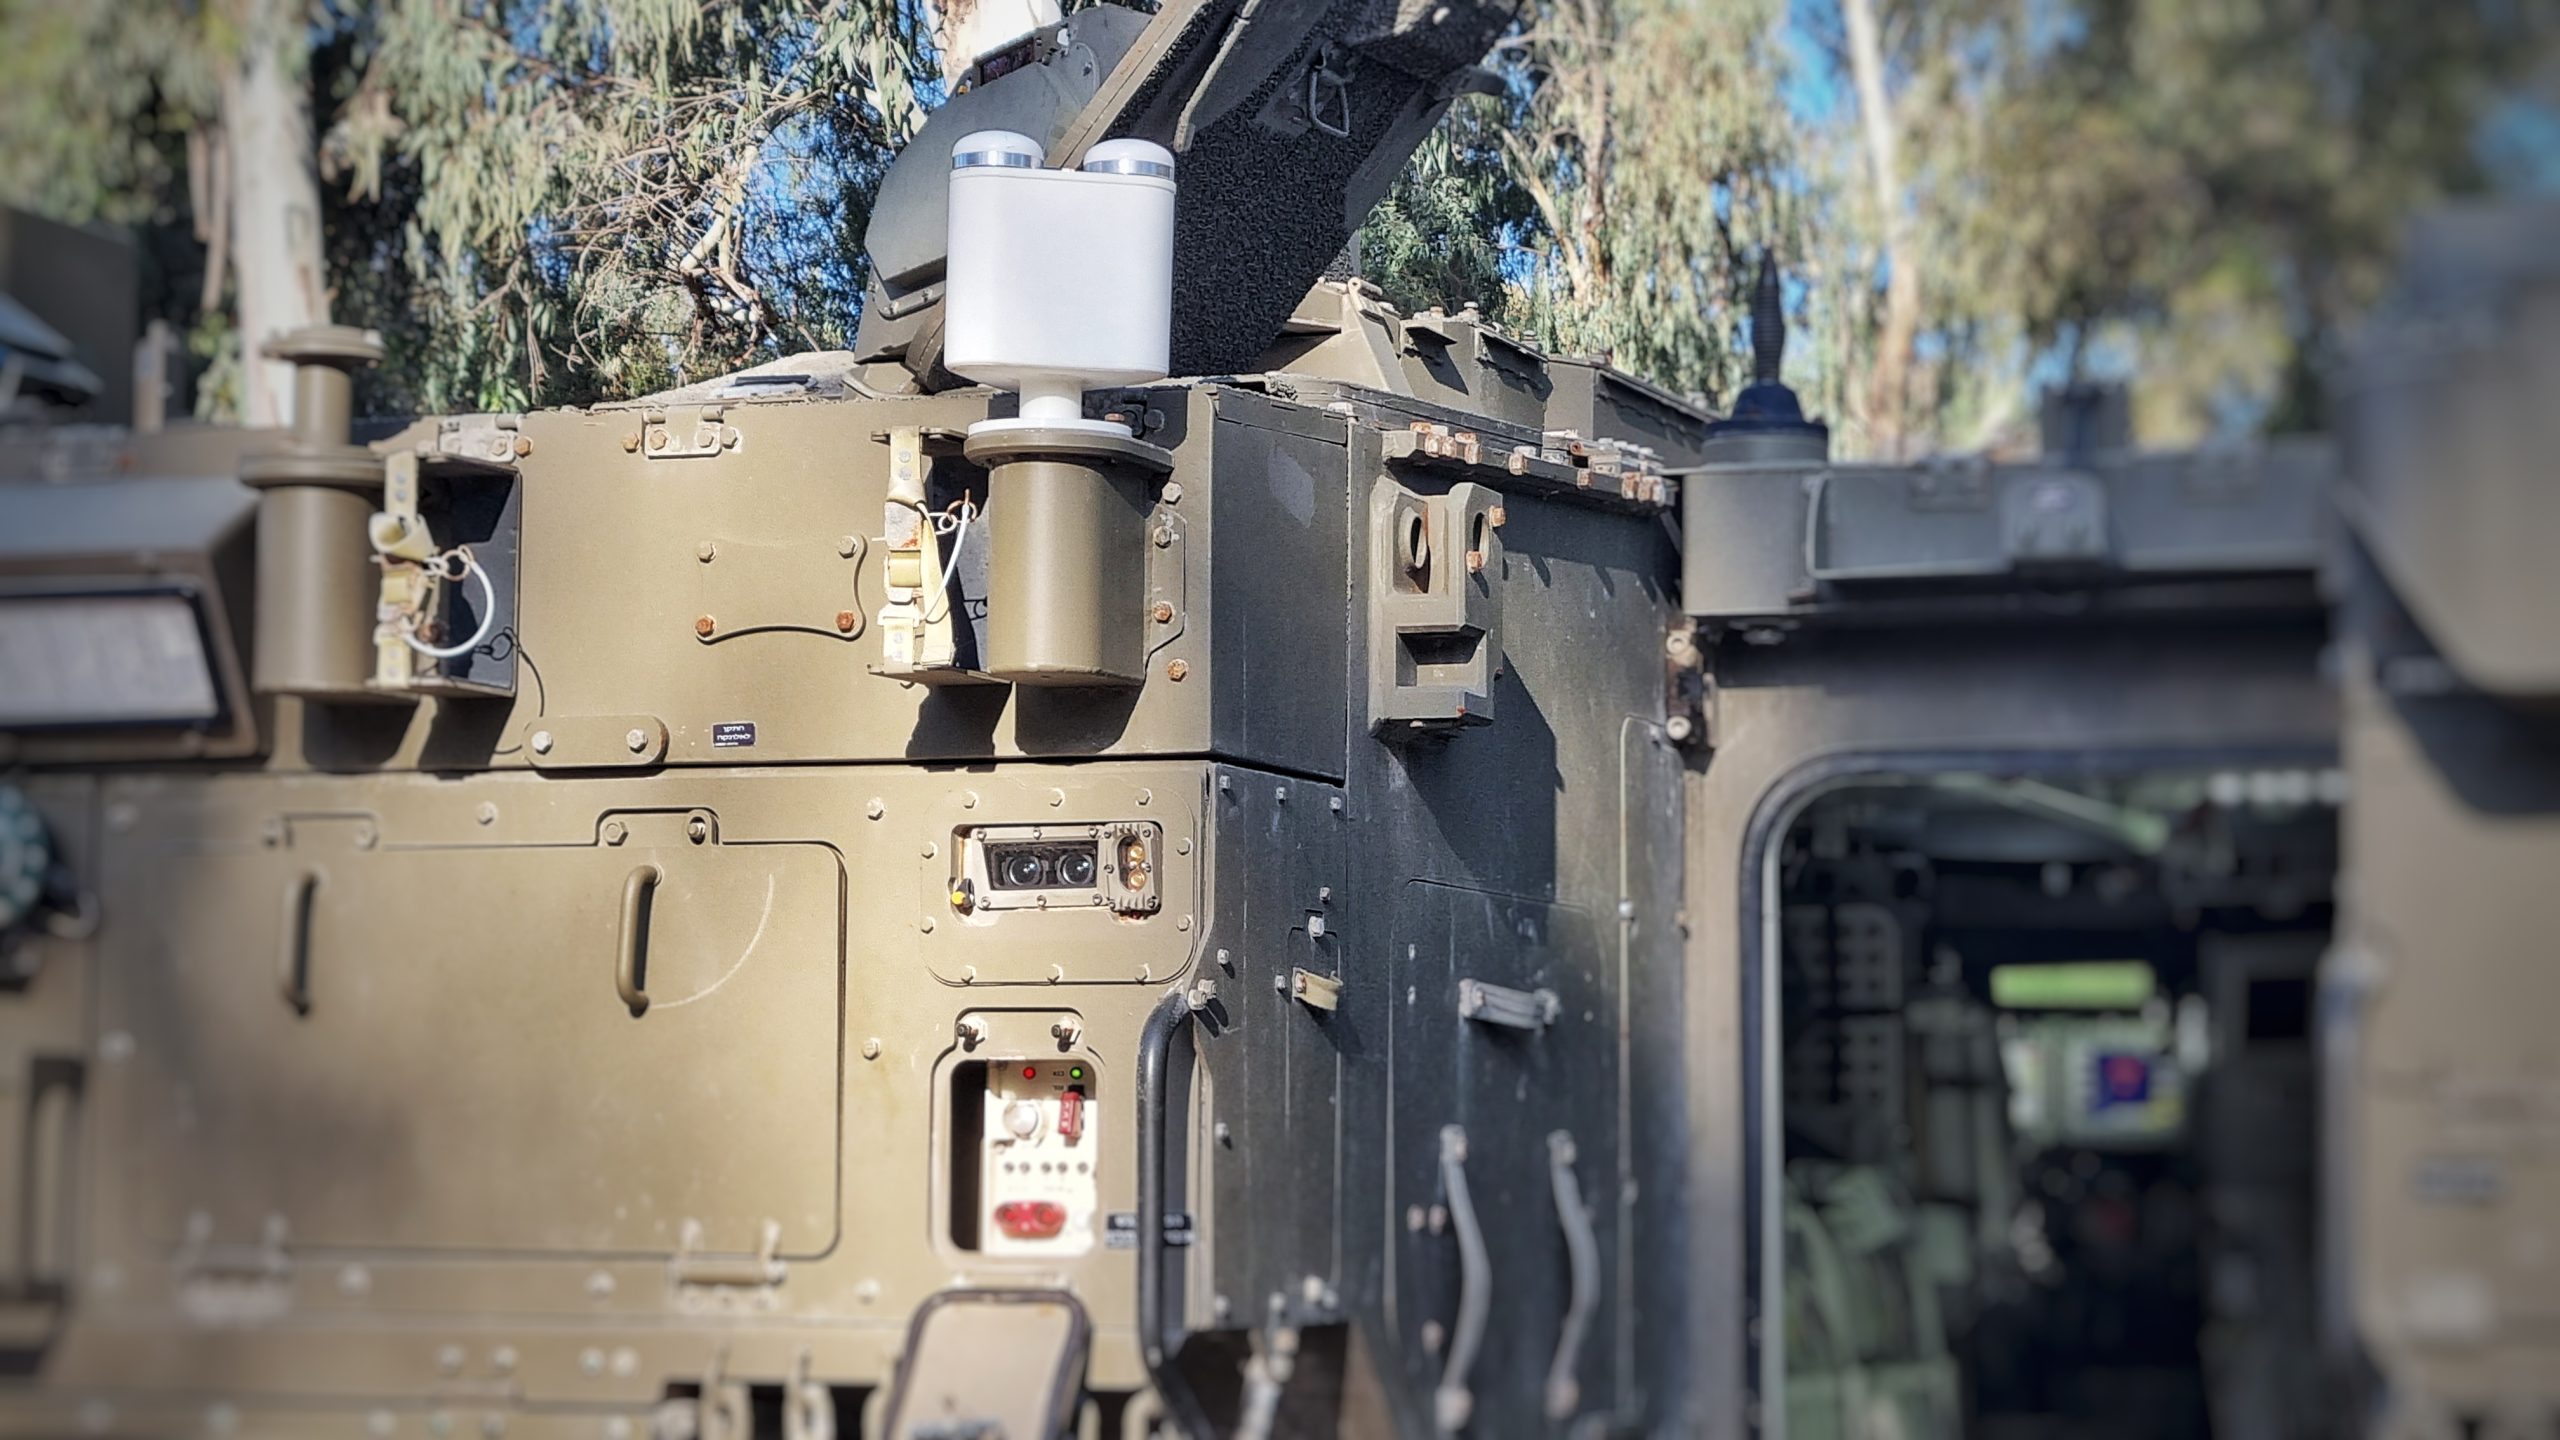 Israeli company Regulus Cyber is launching the fully-operational Ring ARM-V, specifically designed and aimed at protecting armored vehicles, convoys and deployed troops from drone attacks, including multi-rotor, fixed-wing, swarms and dark-drones. With dual top protection and omni protection, it brings unmatched C-UAS capabilities to troops in any combat situation, without the need to jam or cyber-hack.